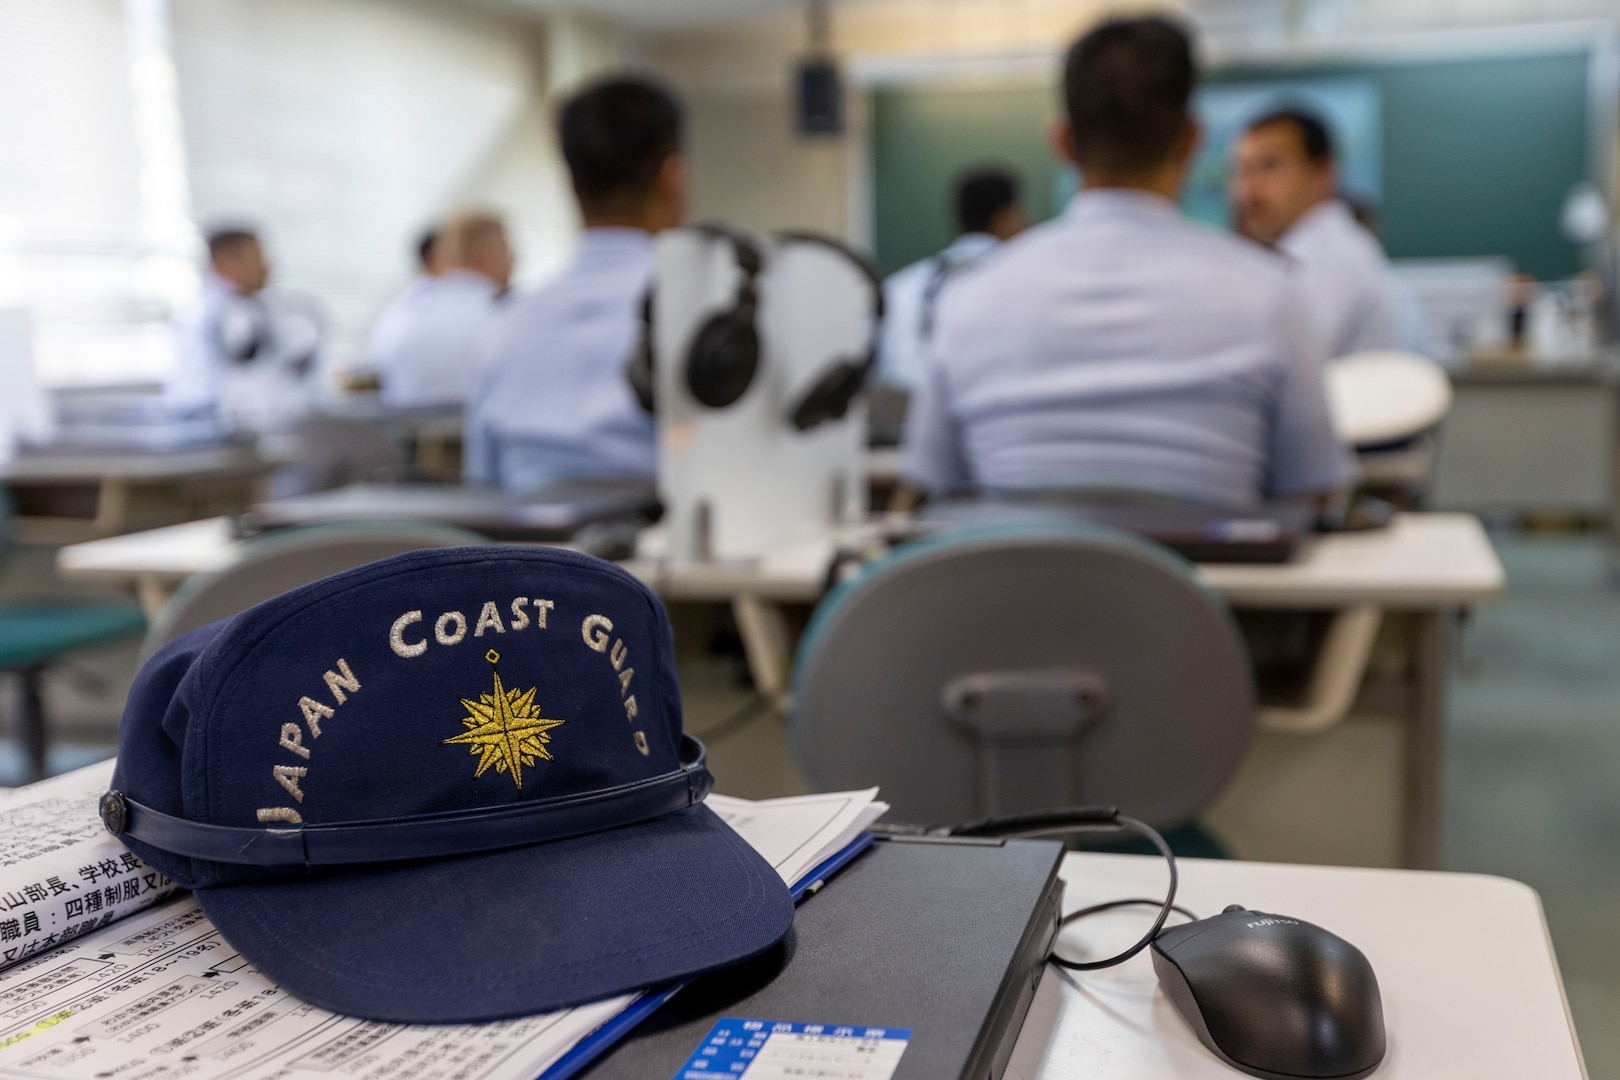 U.S. Coast Guardsmen assigned to the U.S. Coast Guard Cutter Waesche (WMSL-751) visited the Japan Coast Guard School for a guided tour in Maizuru, Japan, June 5, 2024. The tour offered an insight to U.S. Coast Guardsmen on what training is like for members of the Japanese Coast Guard. Waesche is the second U.S. Coast Guard National Security Cutter deployed to the Indo-Pacific in 2024. Coast Guard cutters routinely deploy to the region to engage with partner nations to ensure a free and open Indo-Pacific. (U.S. Marine Corps photo by Cpl. Elijah Murphy)